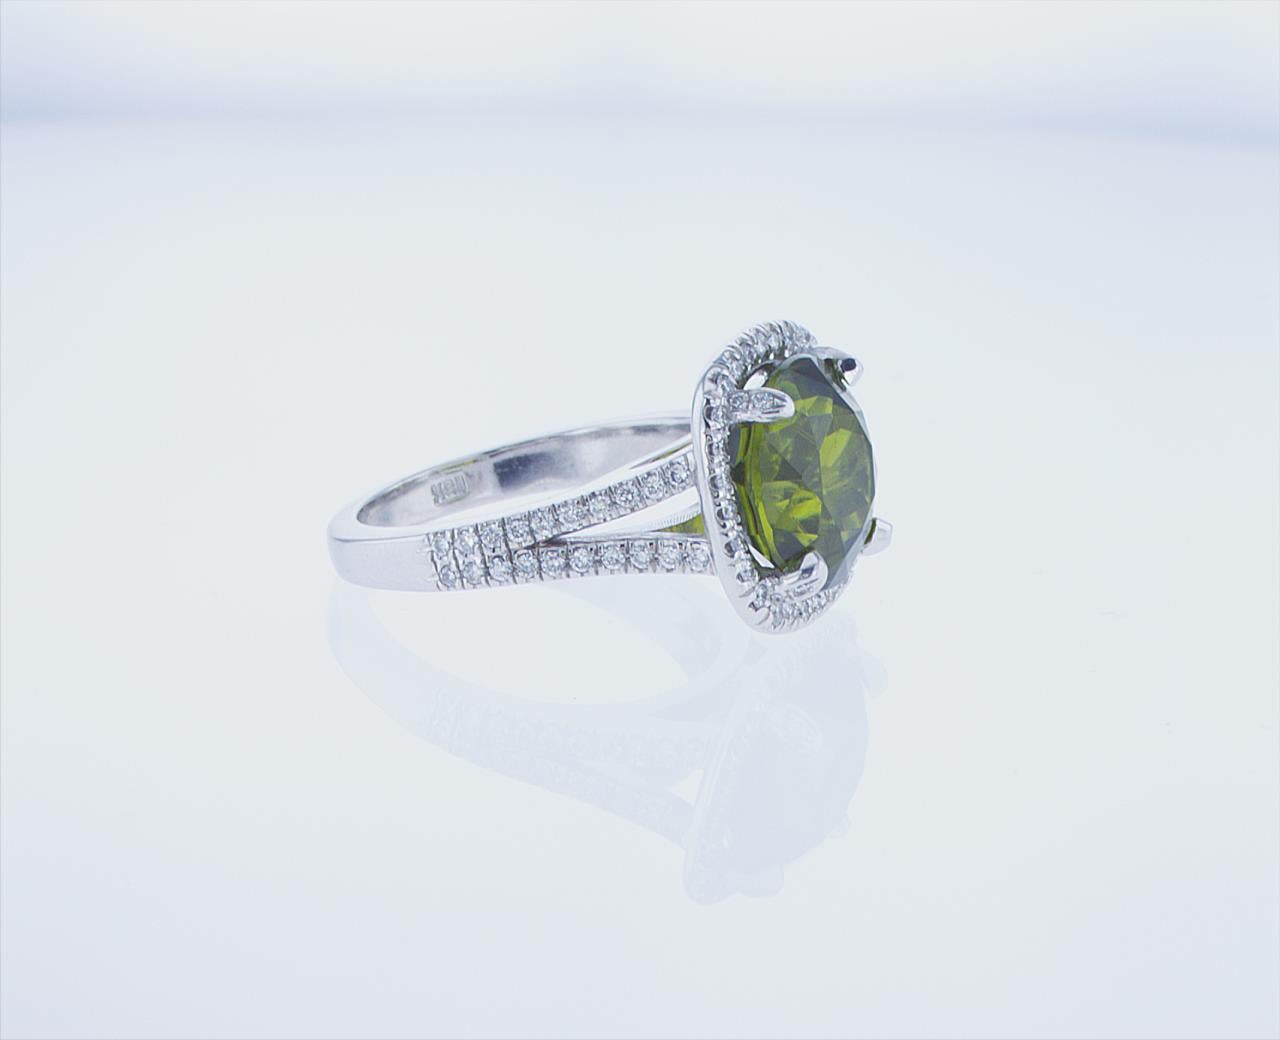 6.38ct Cushion Shape Peridot Cocktail Ring in 18k White Gold with Palladium In New Condition For Sale In New York, NY